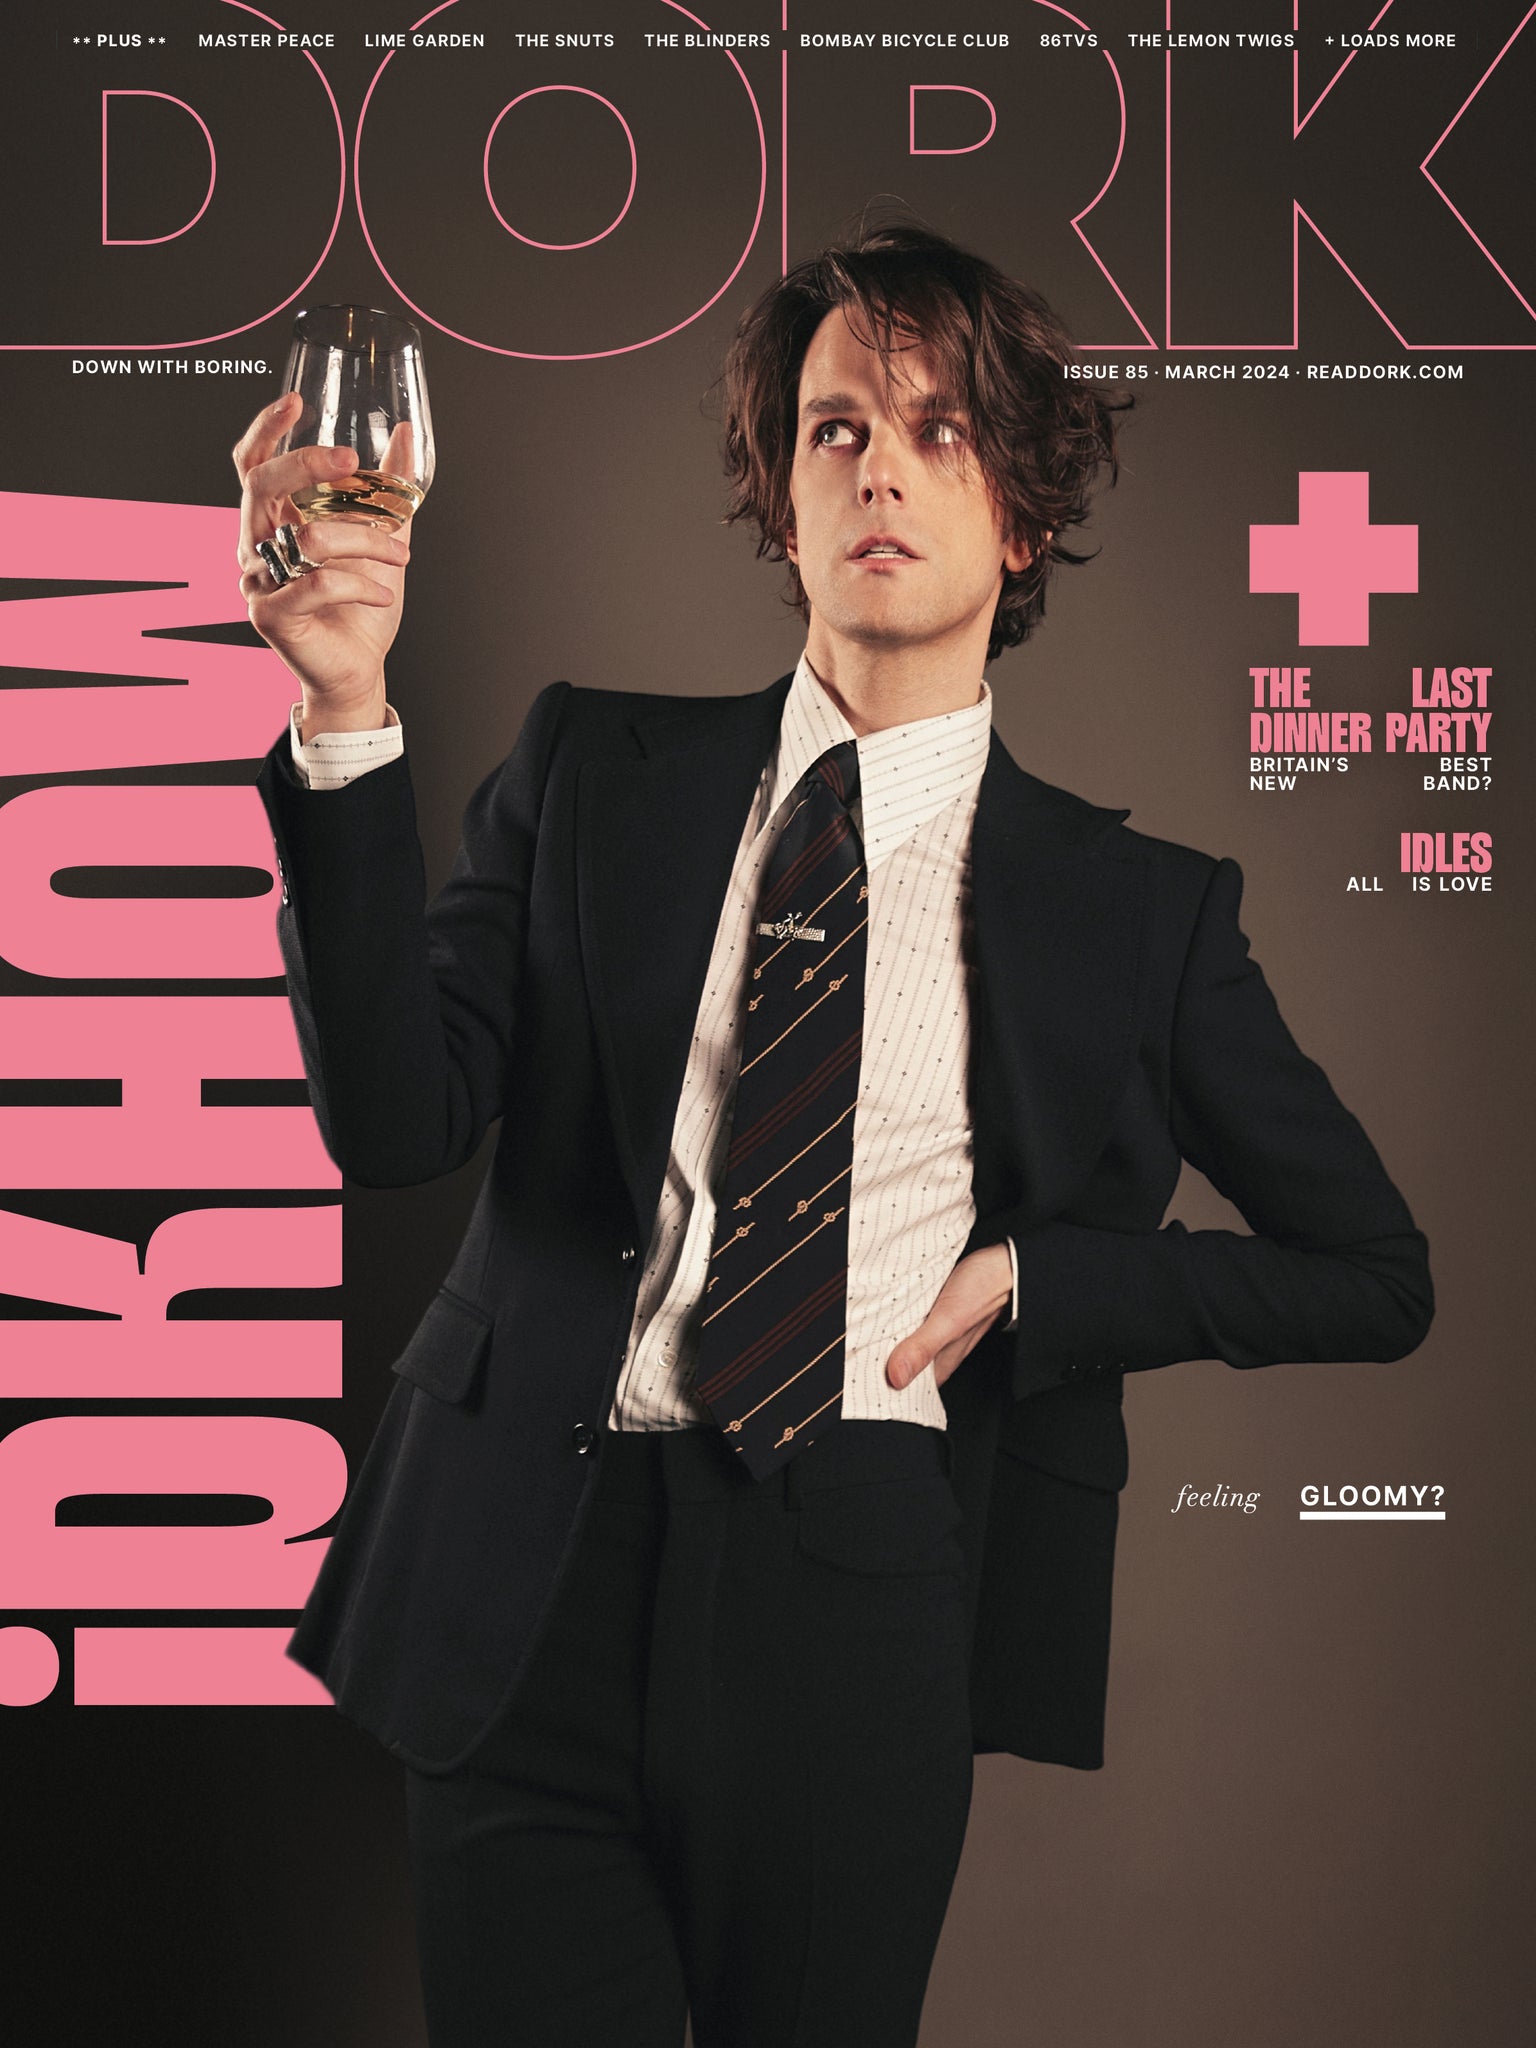 Dork, March 2024 (iDKHOW cover)